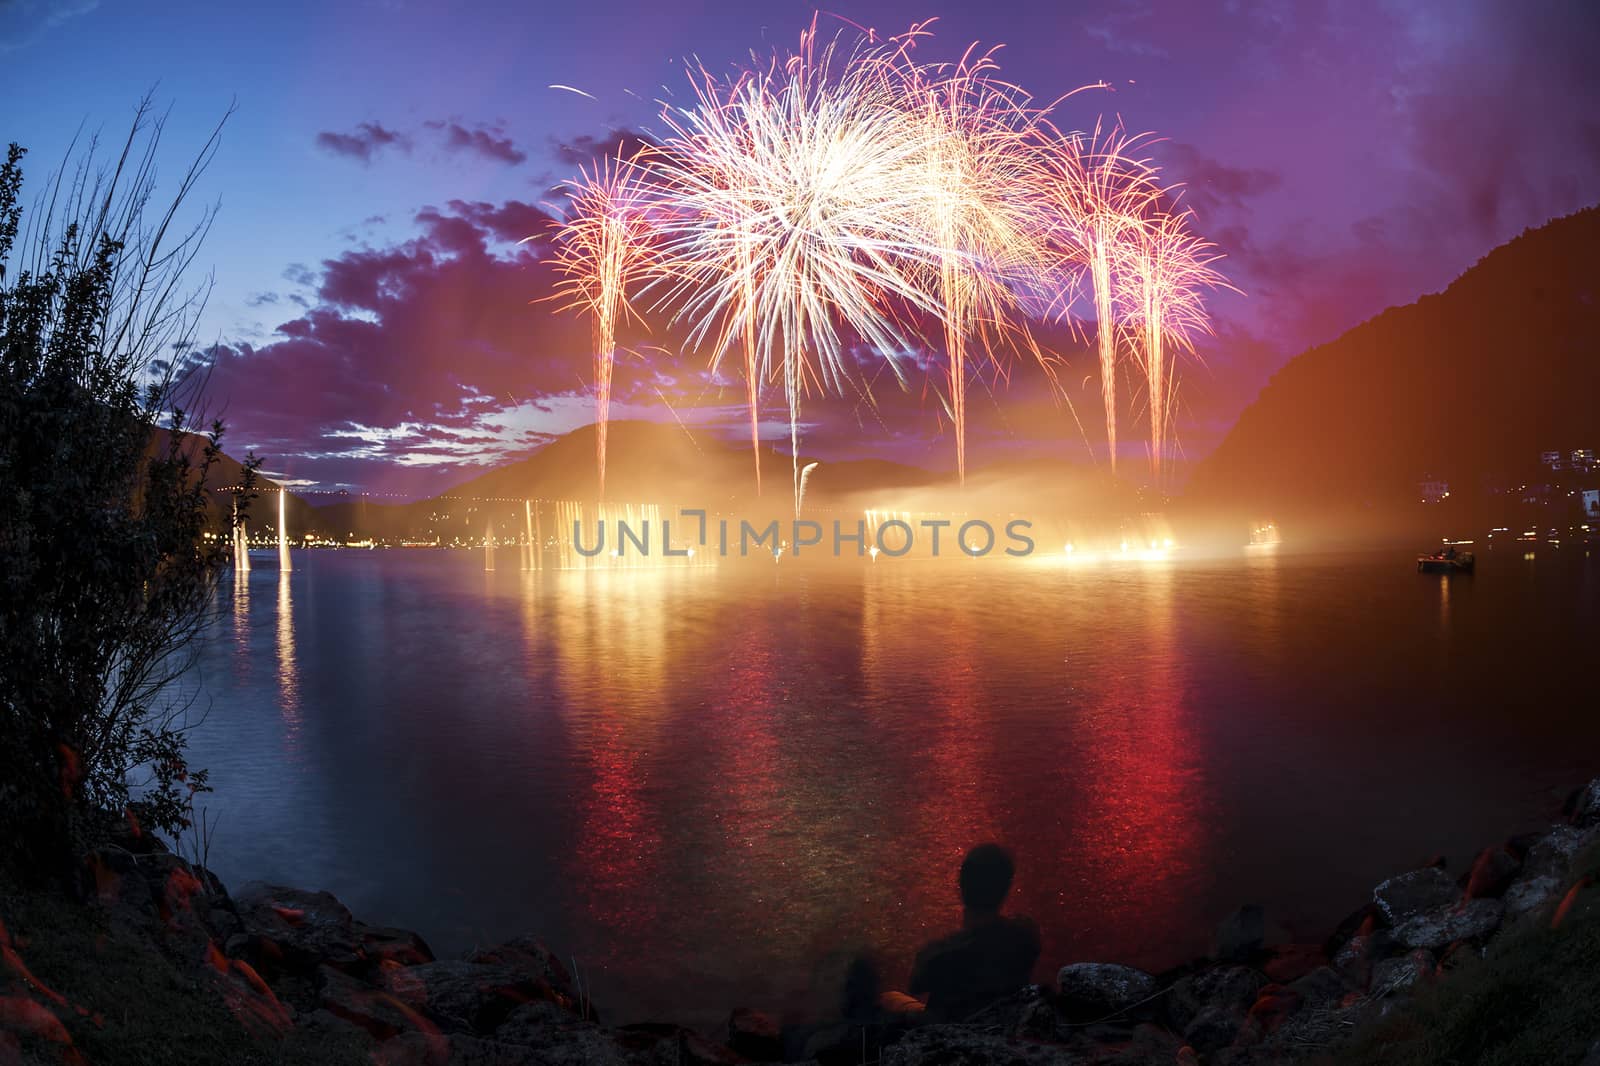 Fireworks on the Lugano Lake by Mdc1970